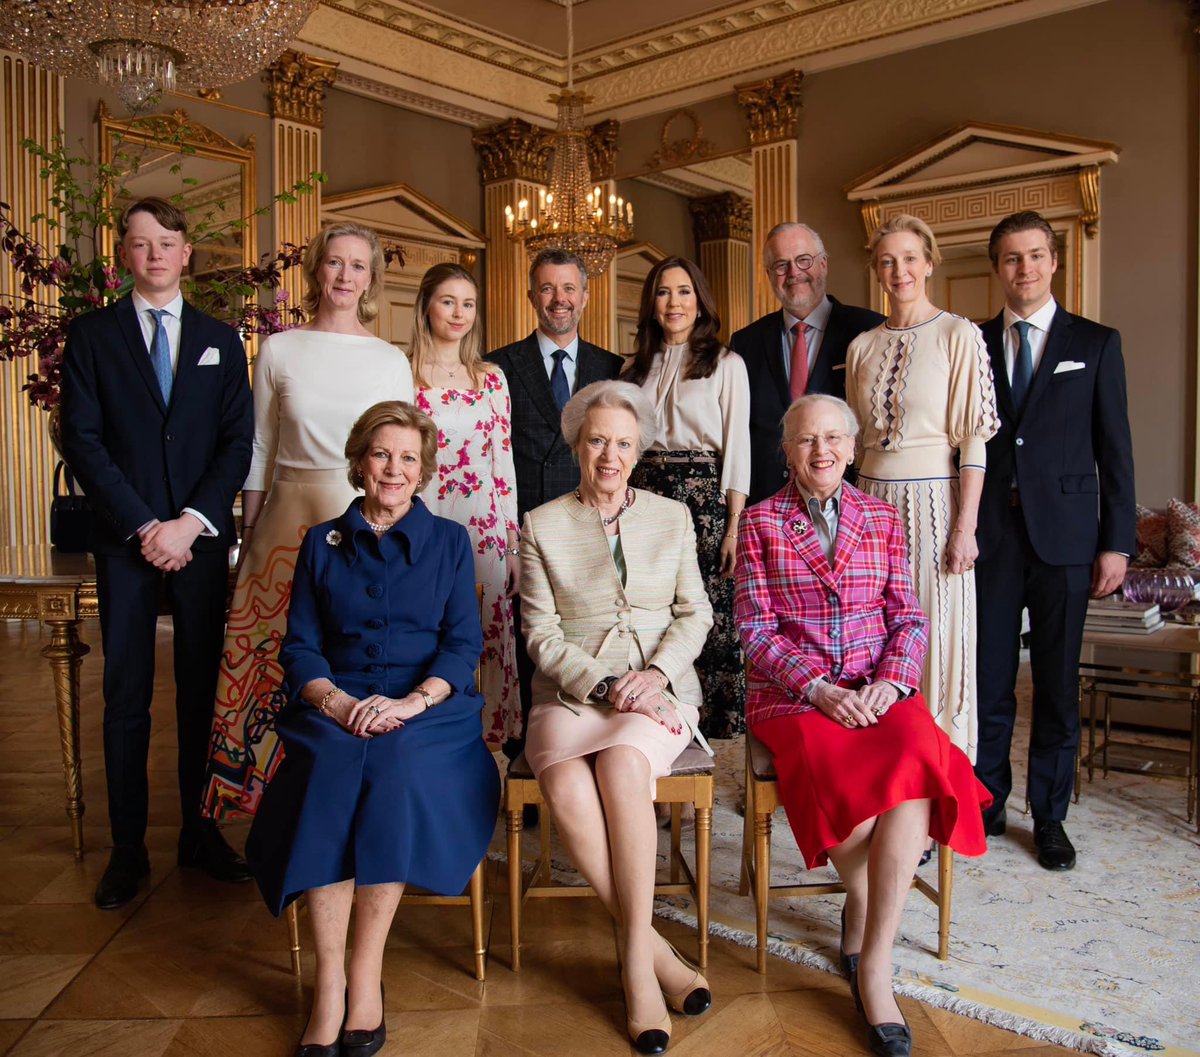 King Frederik and Queen Mary invited Princess Benedikte and her family to a birthday lunch at Frederik VIII's Palace at Amalienborg. HRH was born and raised in Frederik VIII's Palace, the residence of Their Majesties the King and Queen. 📸 Kongehuset